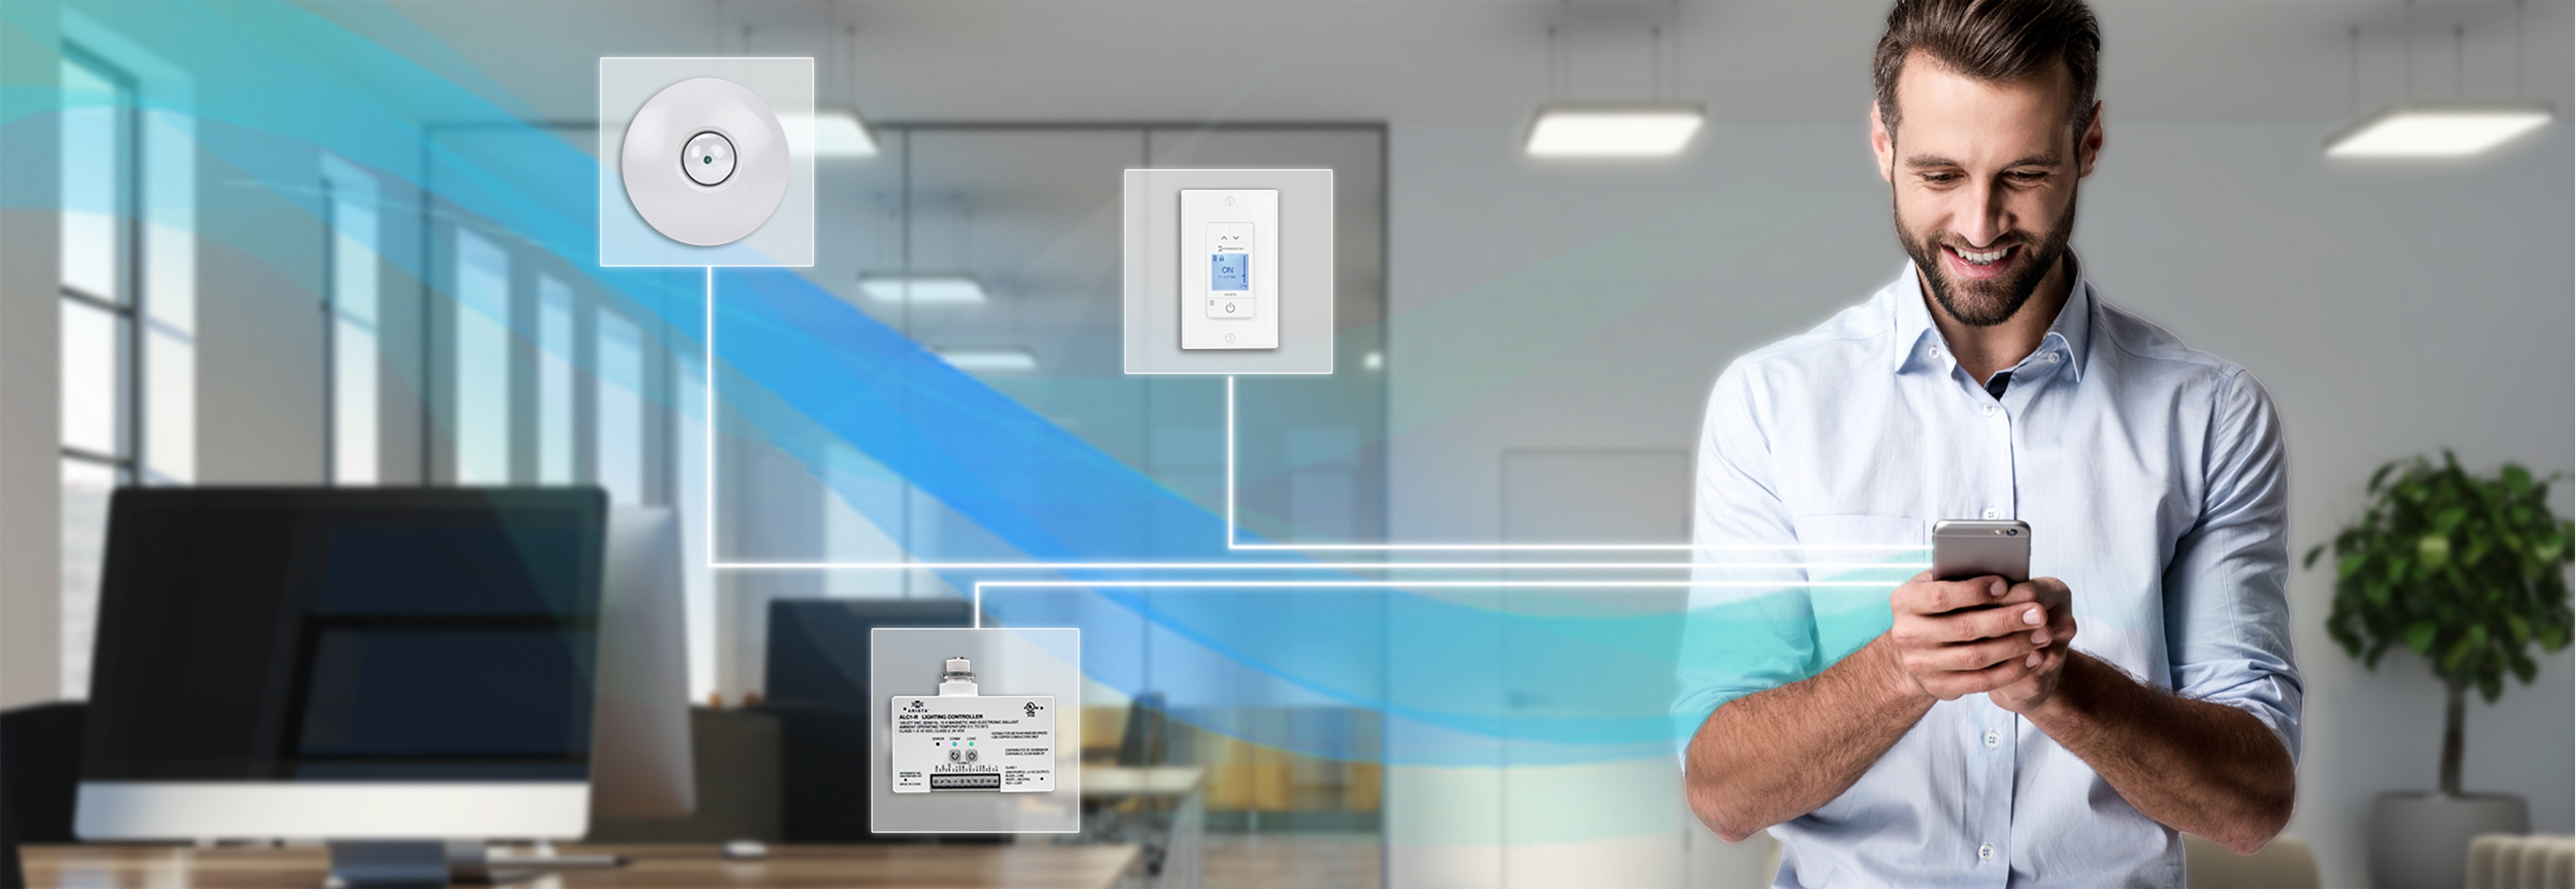 ARISTA® Delivers with Contractor-Friendly Bluetooth® Mesh Wireless Technology